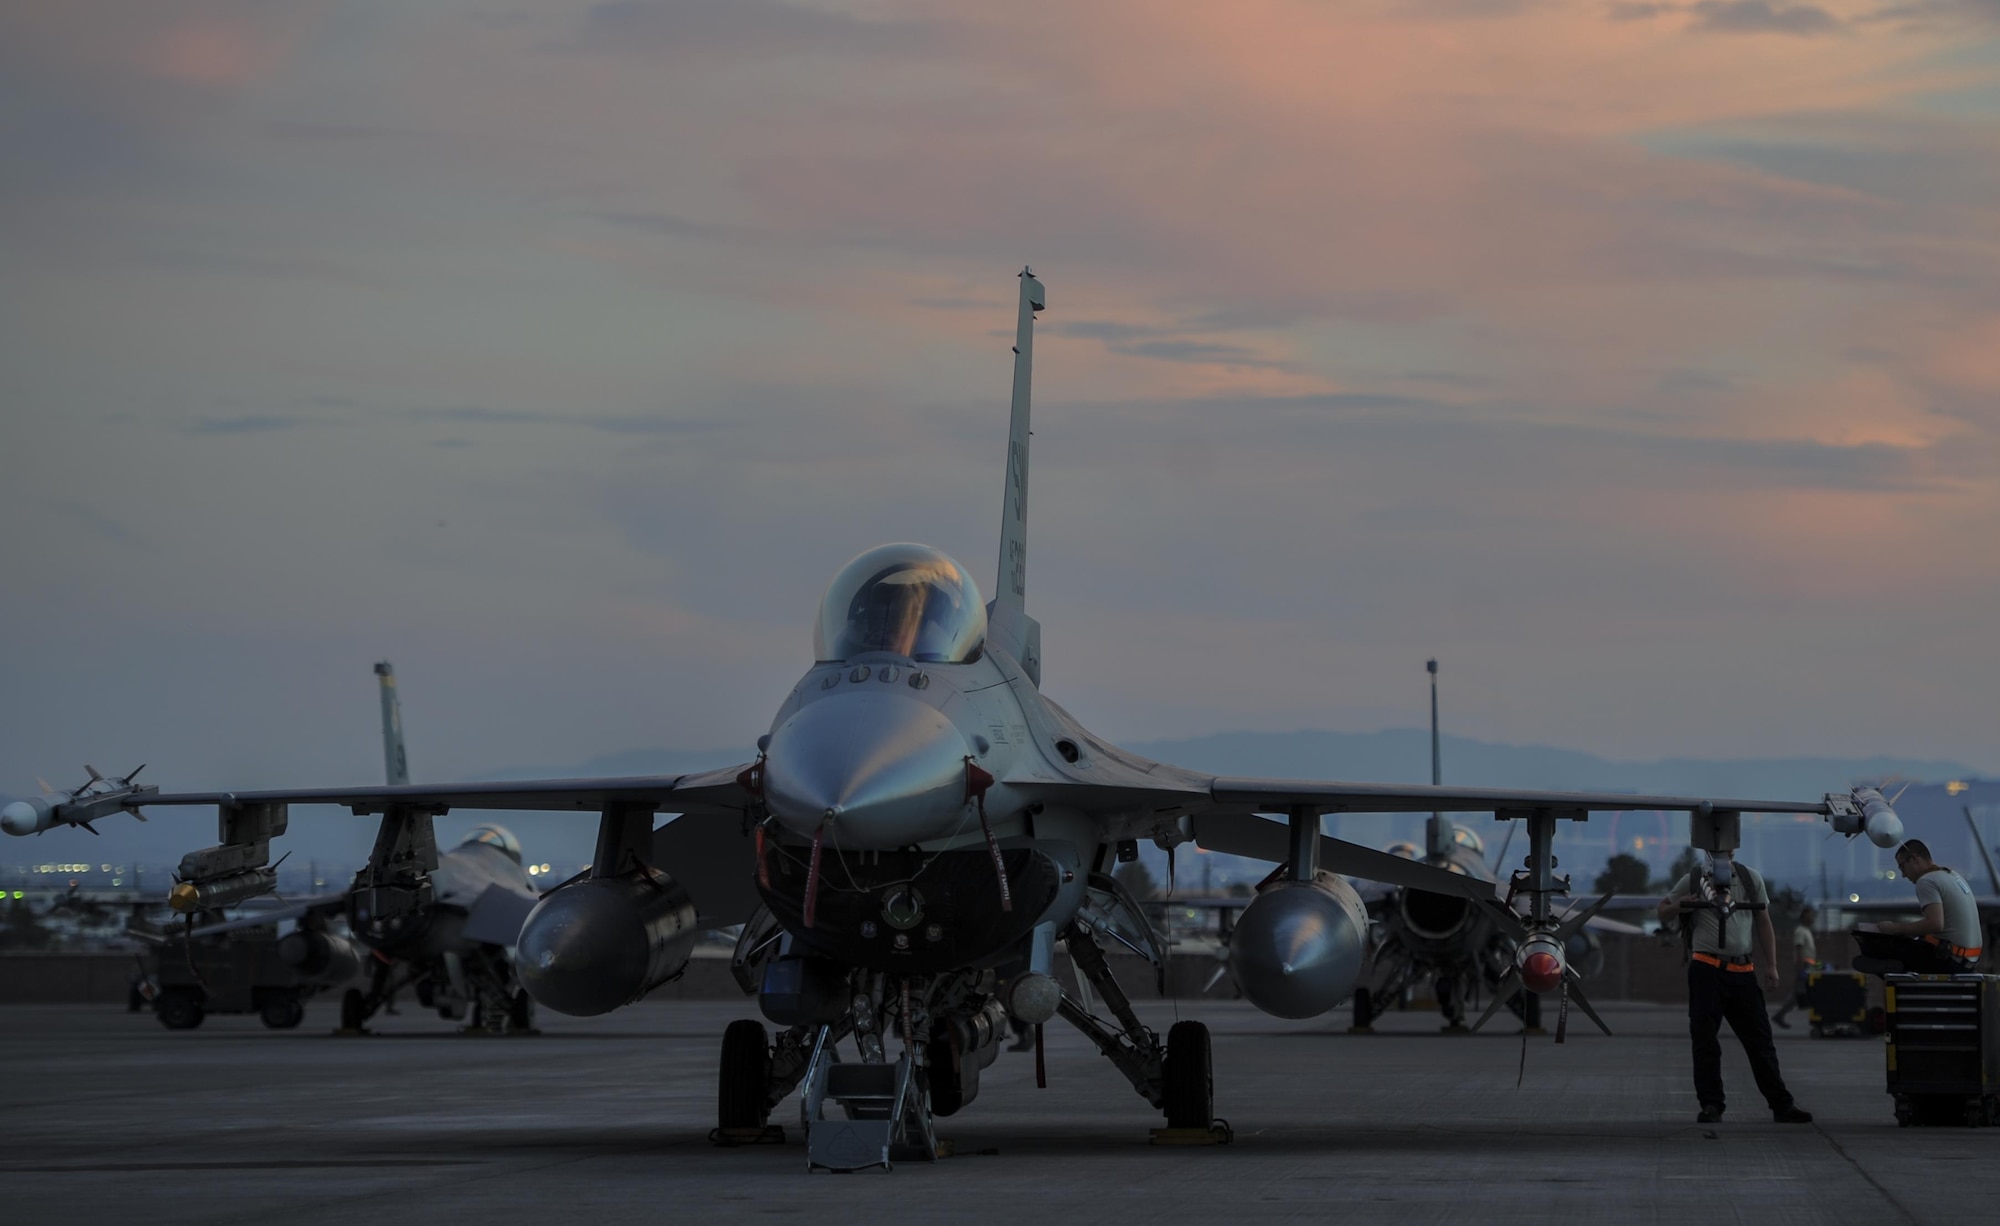 An F-16CJ, assigned to the 79th Fighter Squadron, Shaw Air Force Base, S.C., sits on the flightline during Red Flag 16-3 before take-off at Nellis Air Force Base, Nevada, July 25, 2016. Airmen from the National Air and Space Intelligence Center Operational Requirements Squadron’s Weapons and Tactics Team integrated non-kinetic effects into the exercise, providing pilots the ability to train against cyber threats. (U.S. Air Force photo by Airman 1st Class Kevin Tanenbaum/Released)